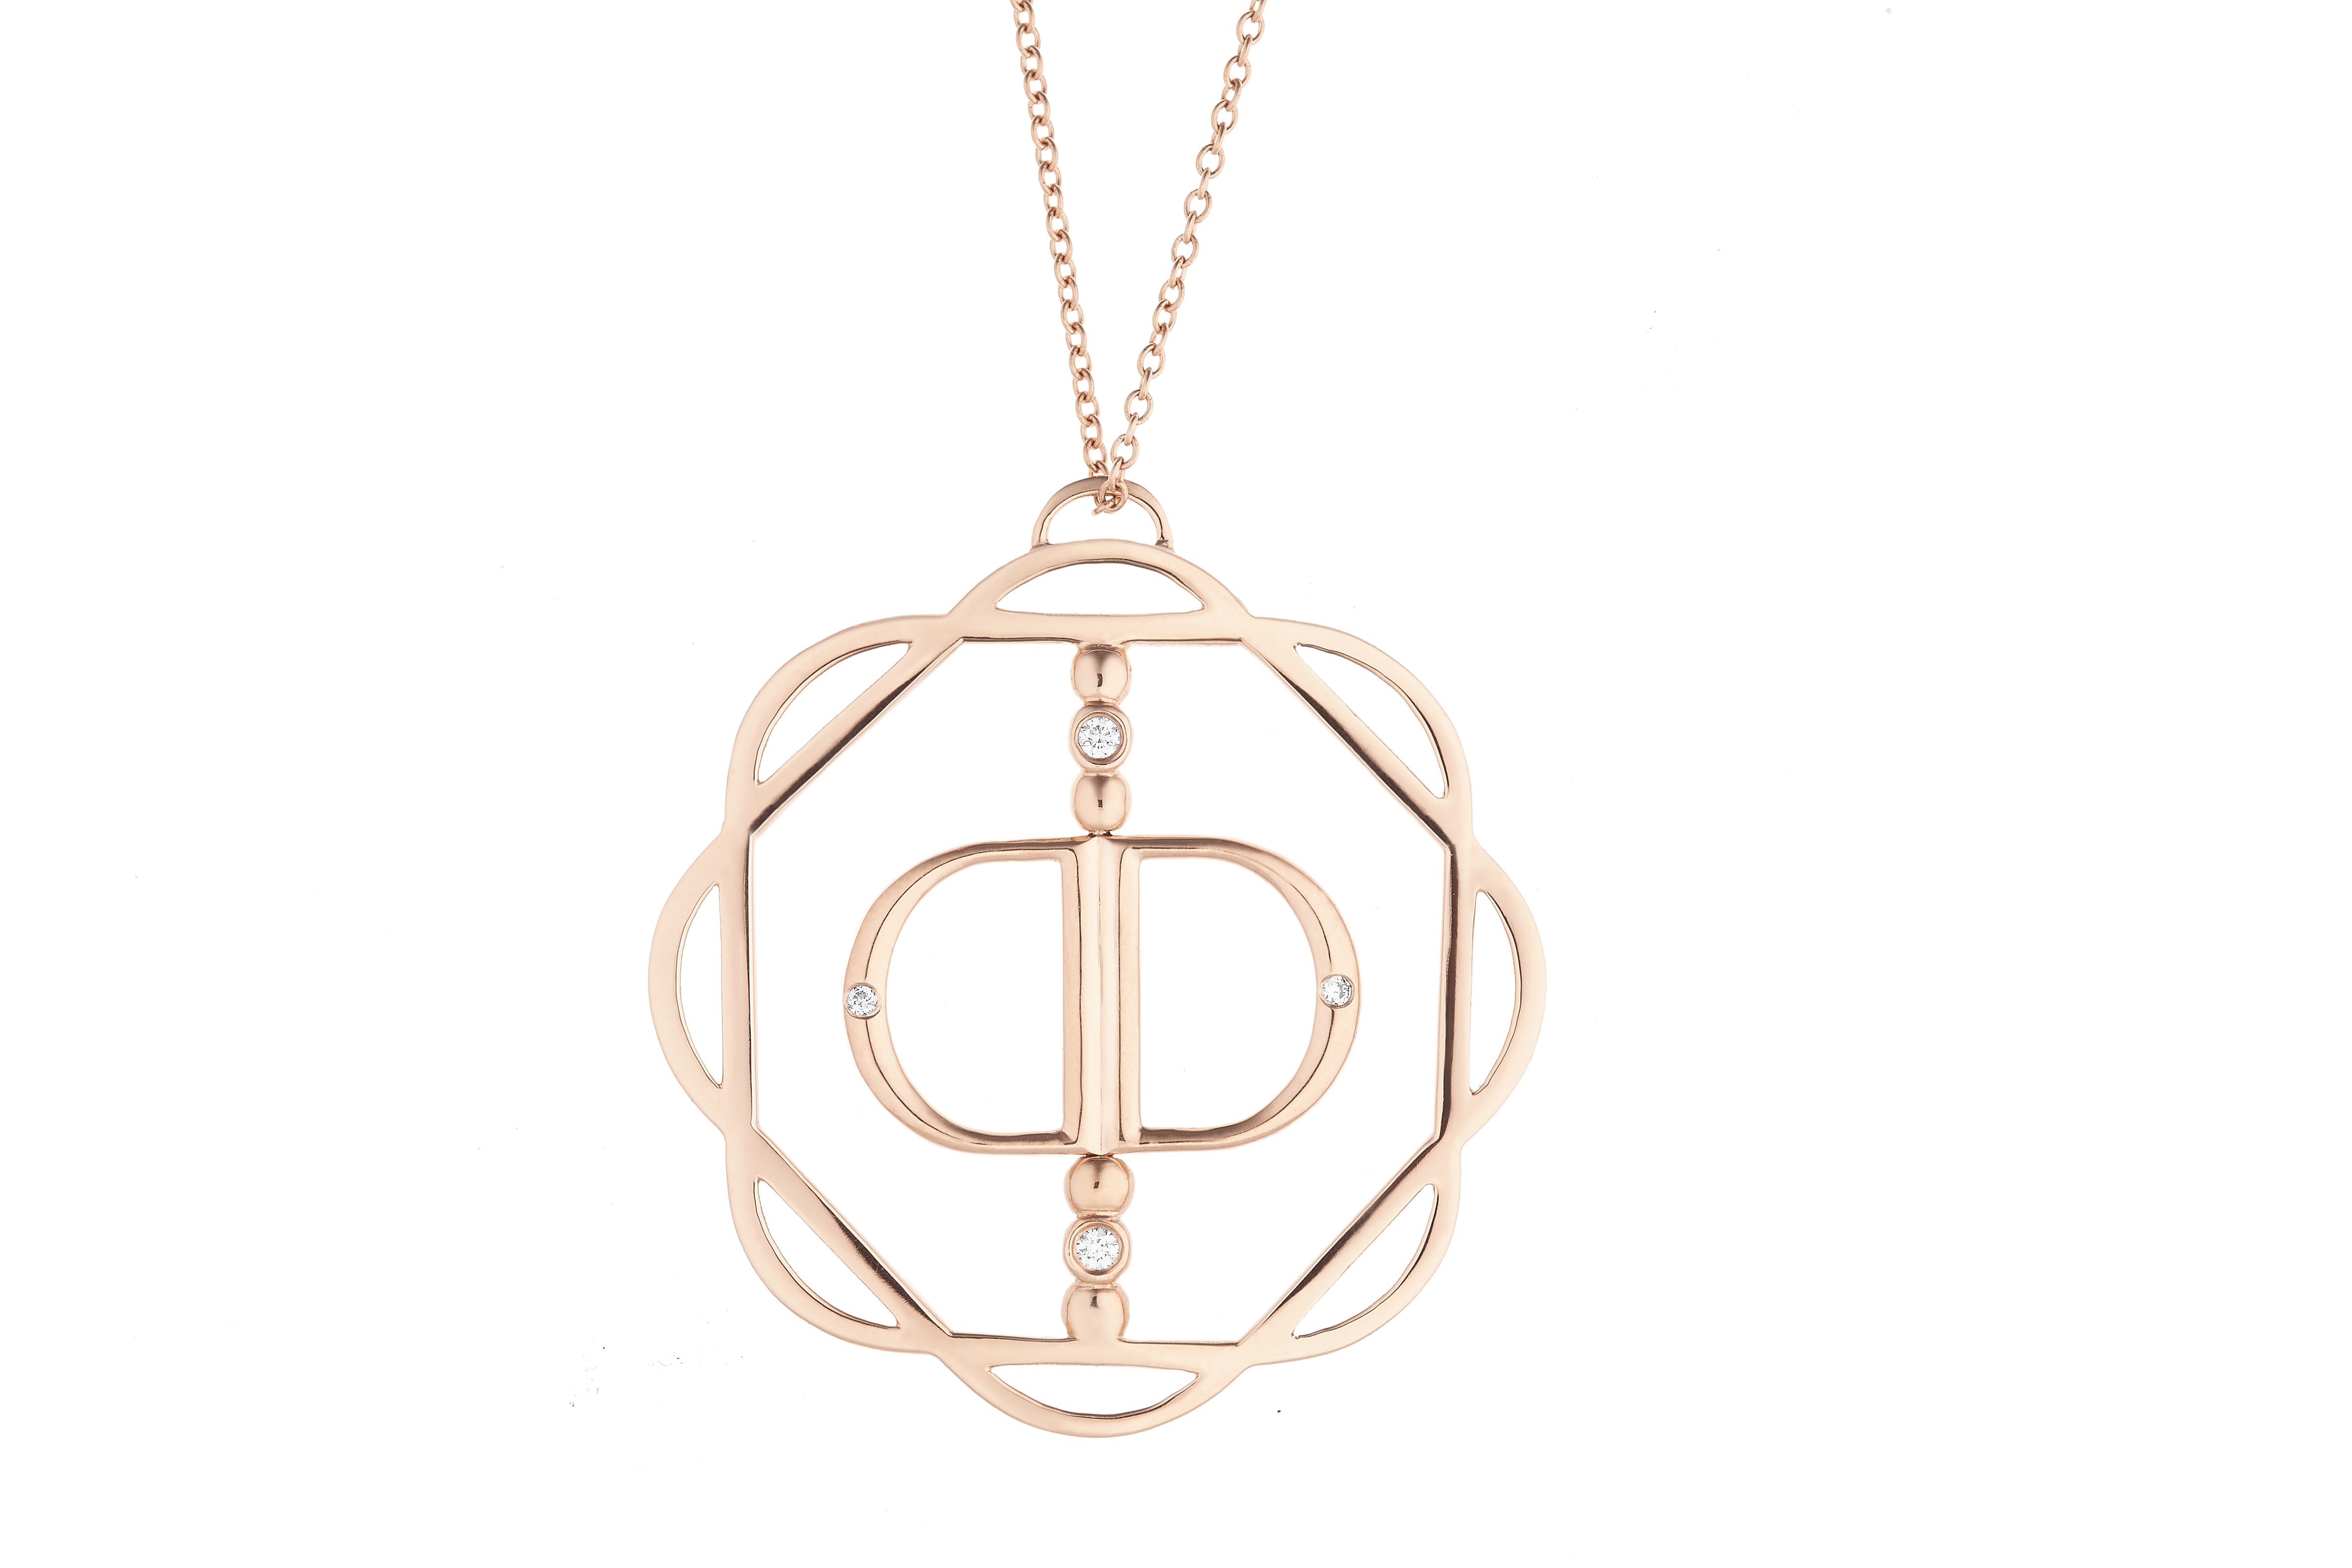 18K Rose Gold Cut-Out Flora Pendant with Mirror Double D and 4 Lab Created Diamonds on AIDIA Extendable Link Chain